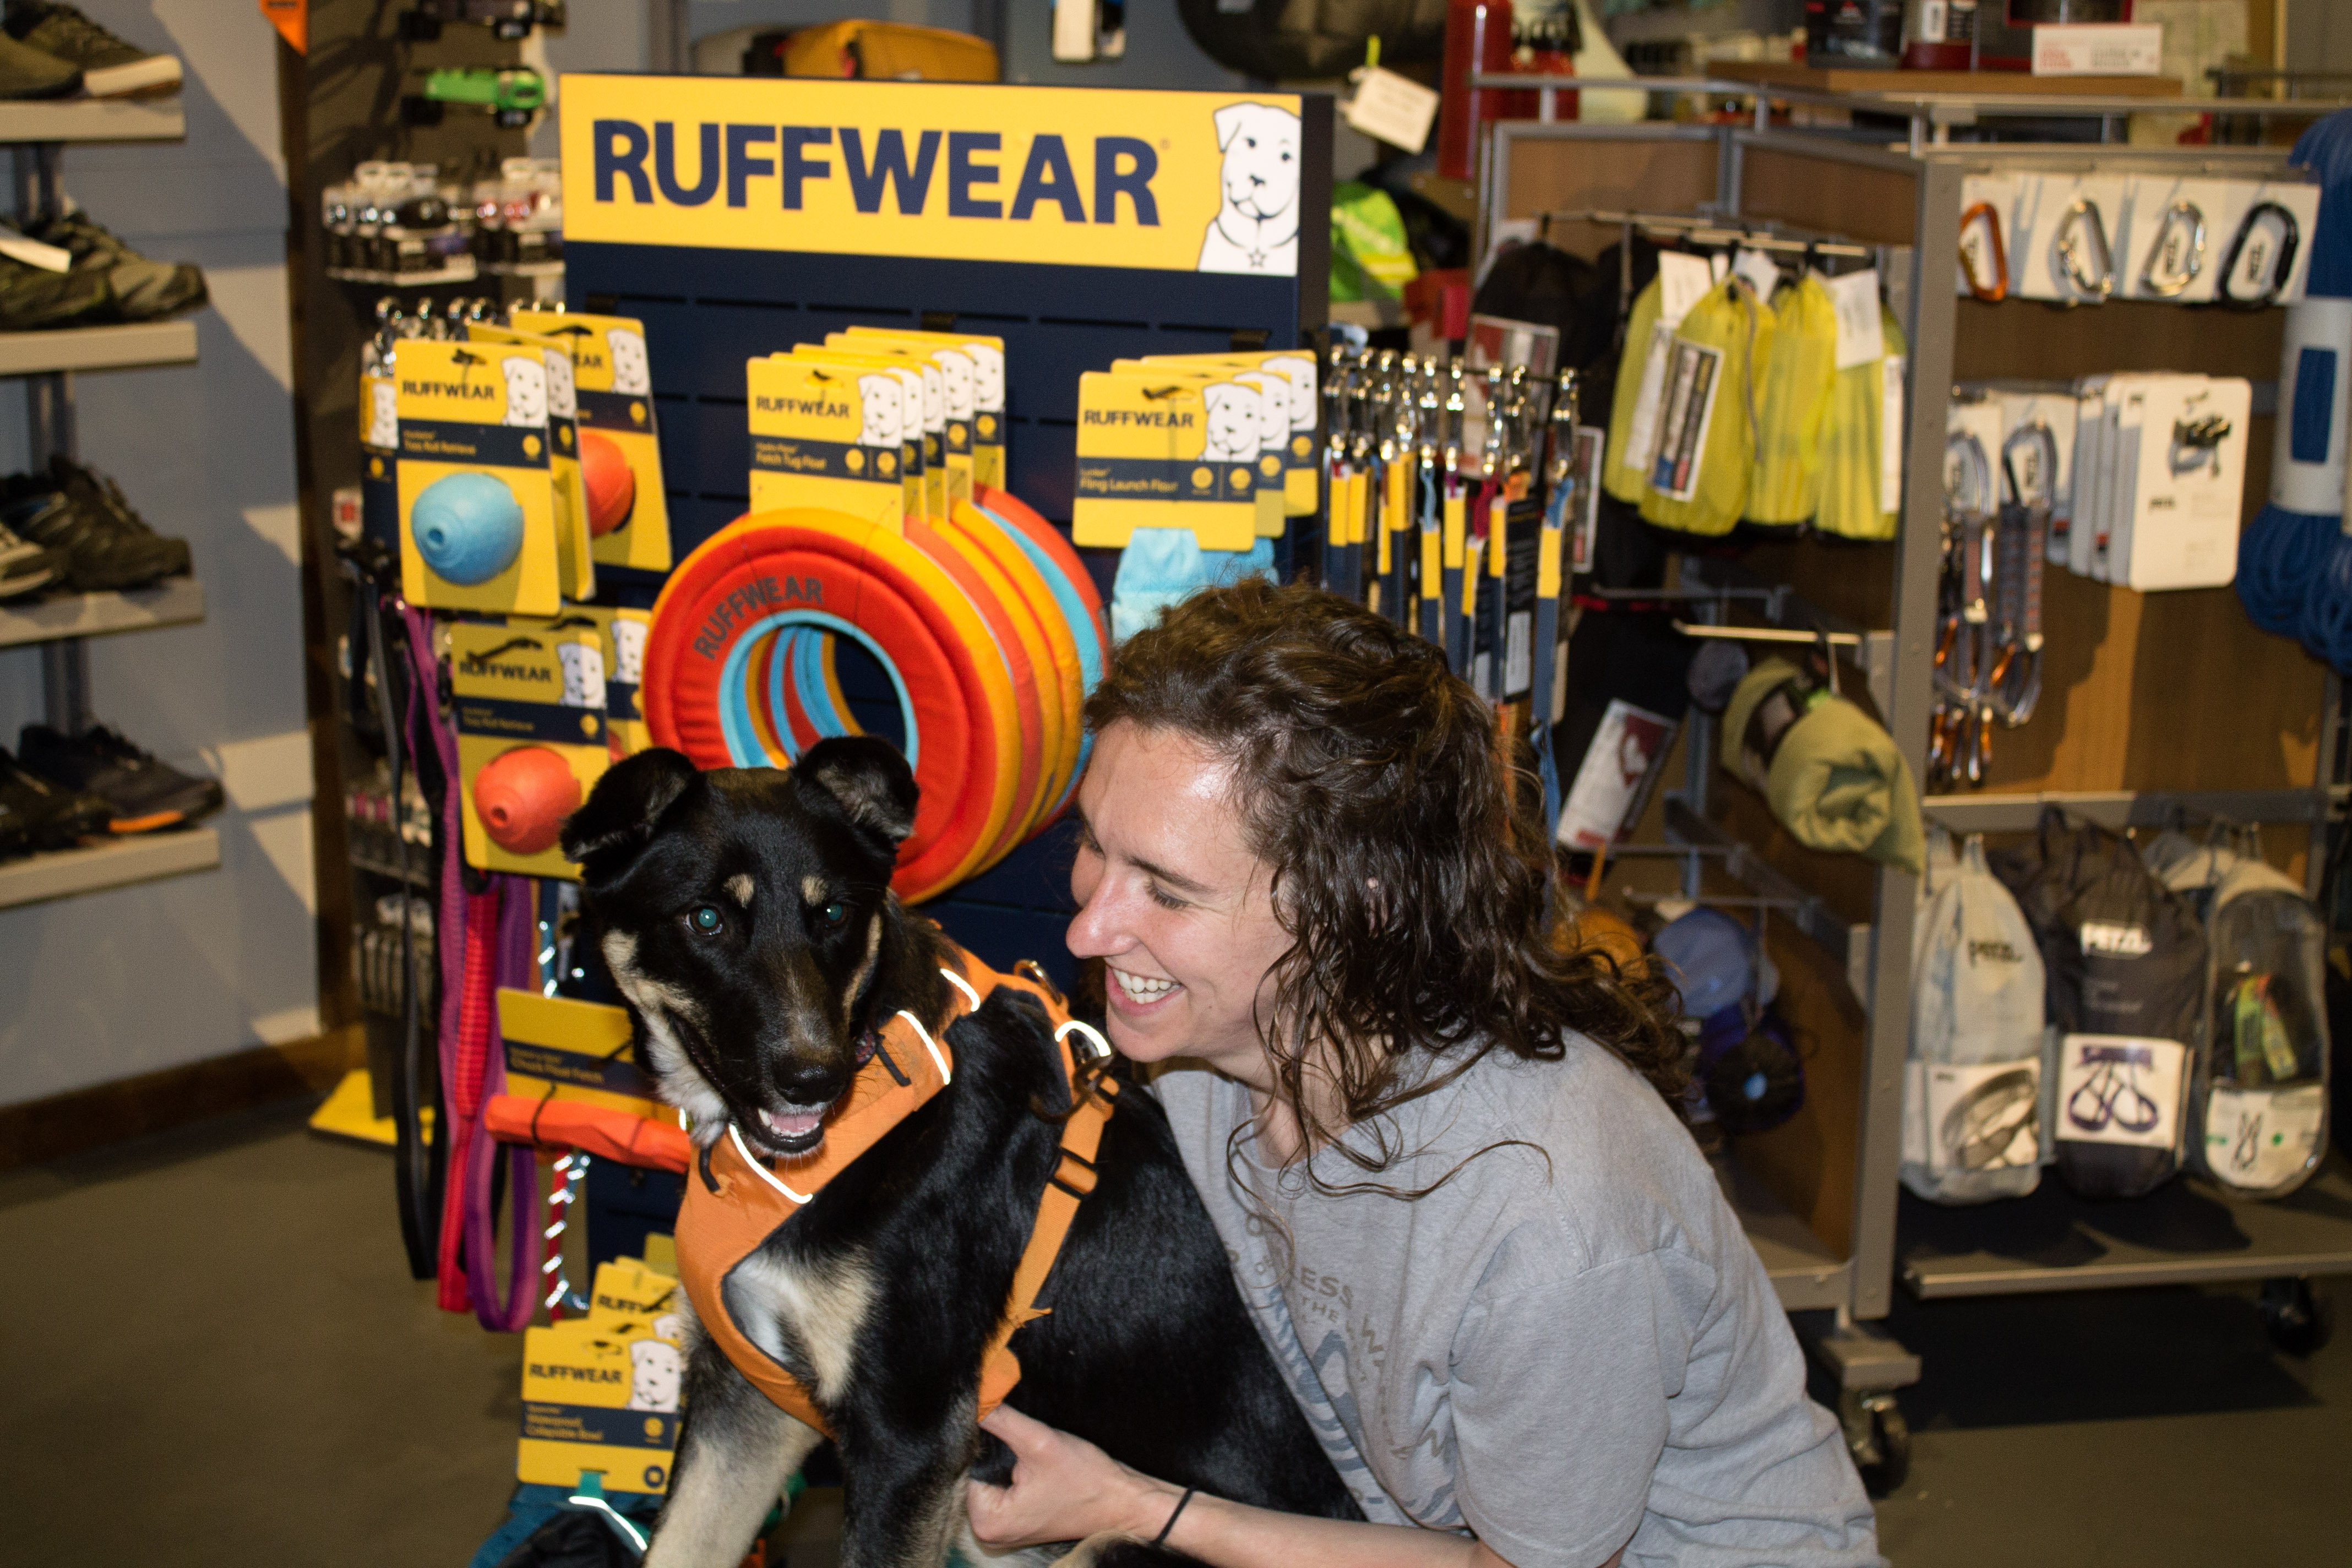 Ruffwear Launch Party at Gearhead Outfitters in Springfield, Missouri.